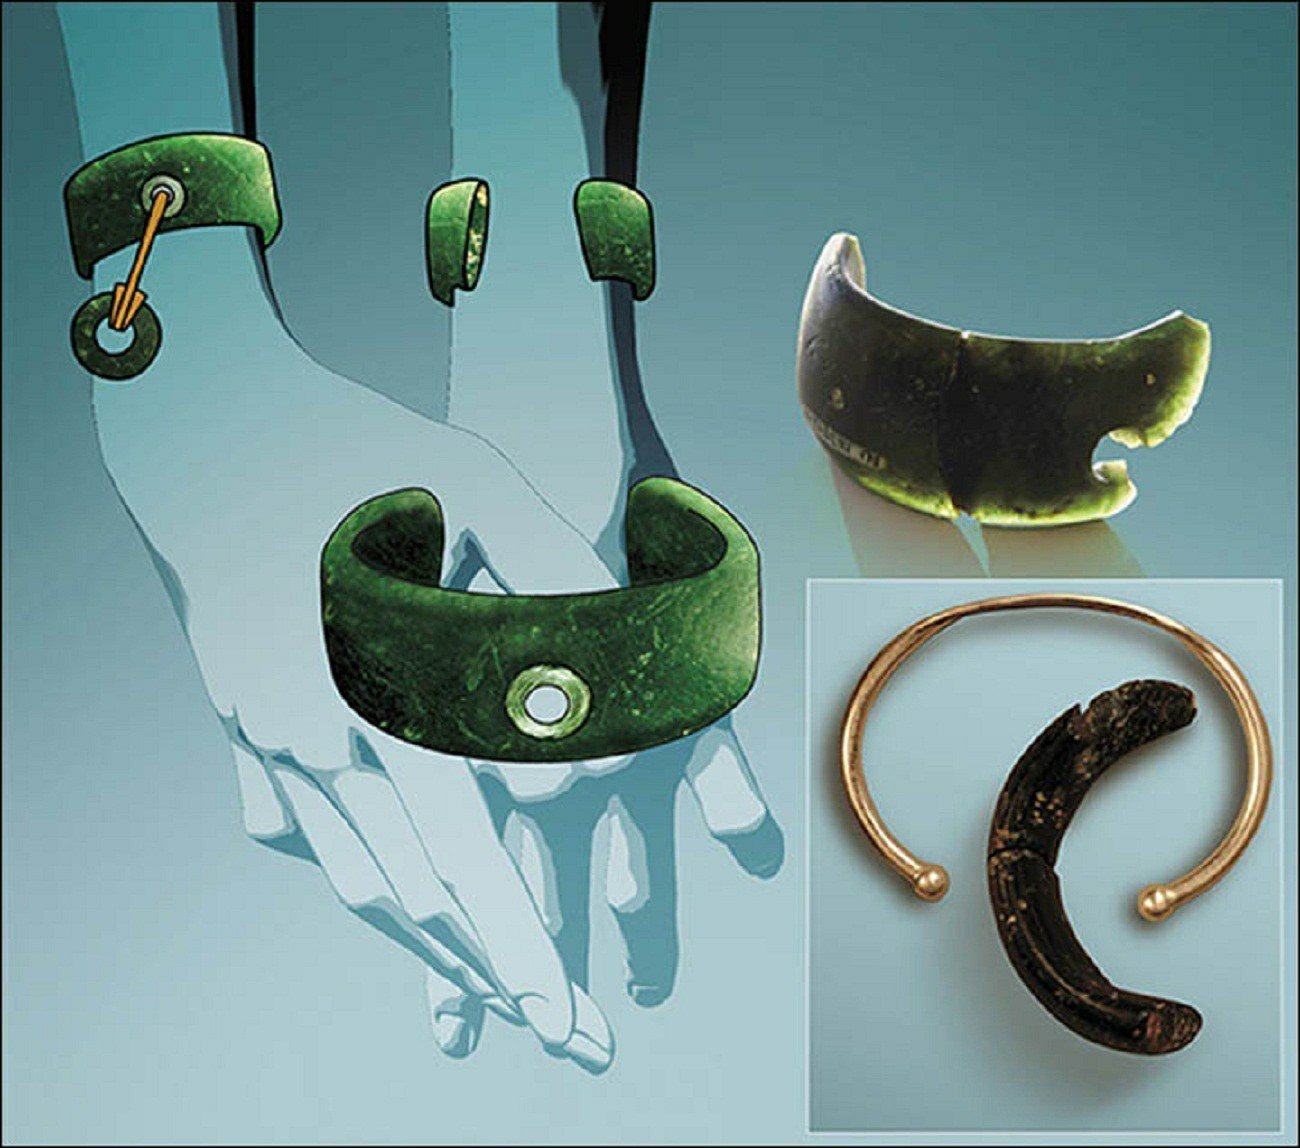 40,000 year old bracelet crafted by pre-historic human ancestors discovered  in the Denisova cave in southern Siberia – Internet Stones.COM Media